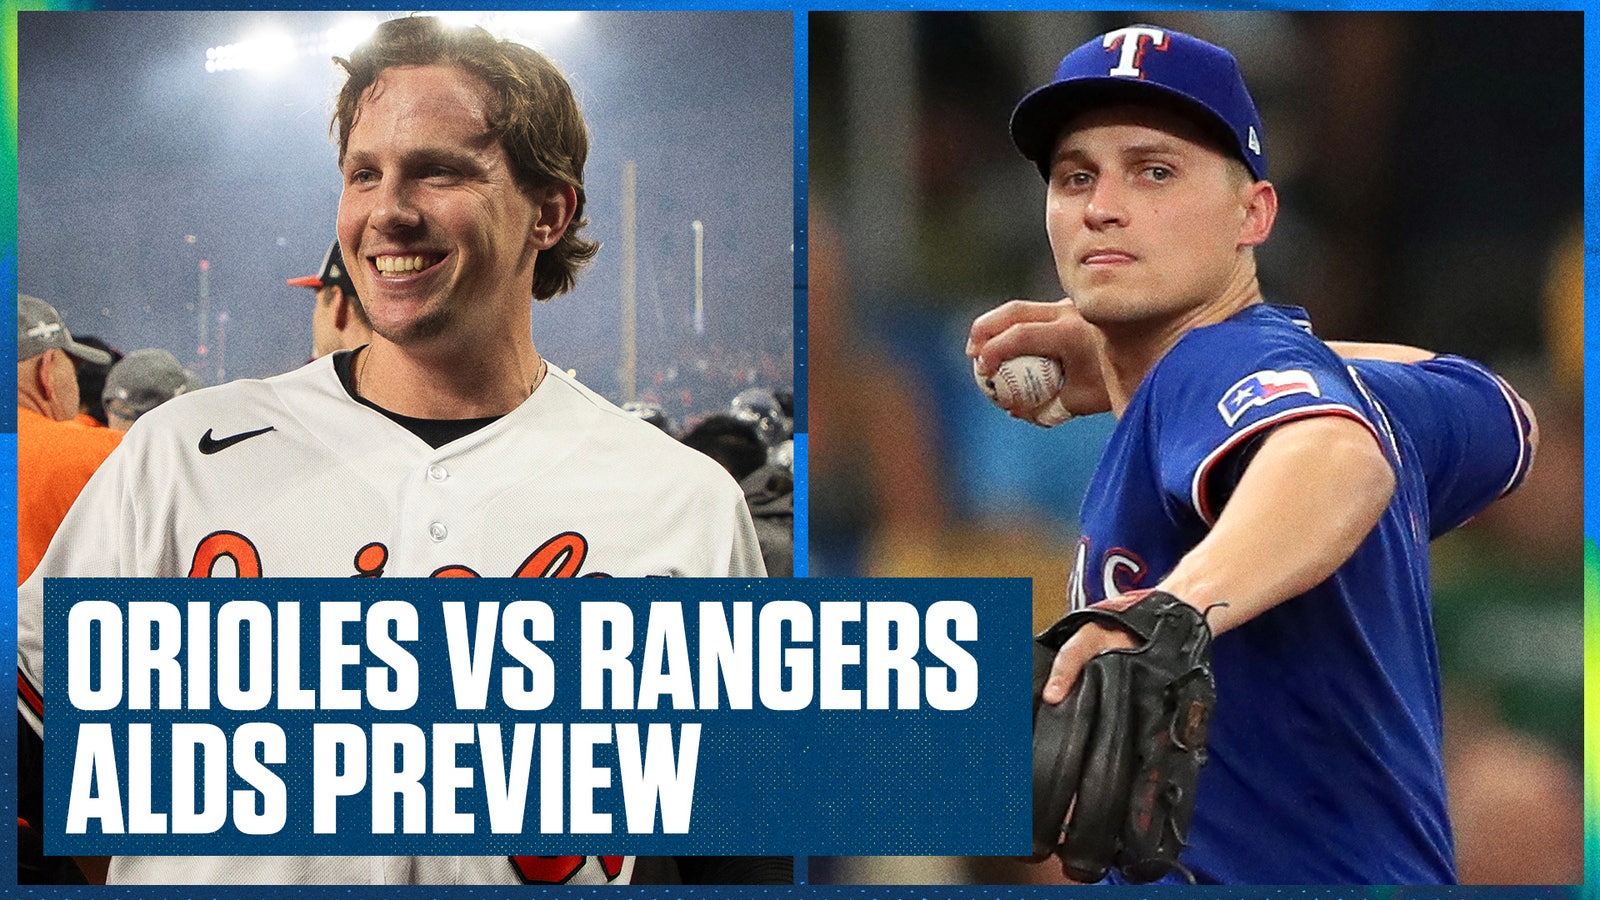 Rangers vs. Orioles ALDS Preview: Who will pitch better?